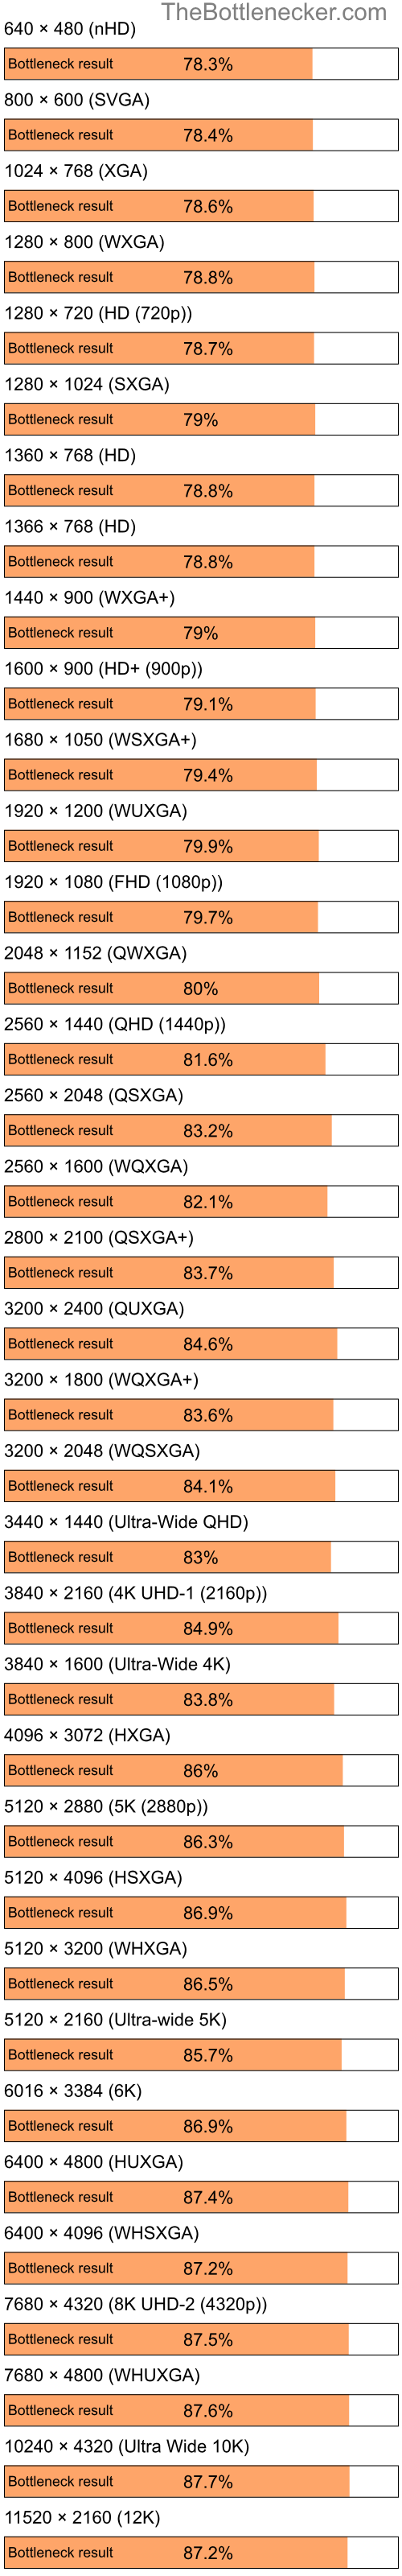 Bottleneck results by resolution for Intel Atom Z520 and AMD Radeon X1270 in7 Days to Die